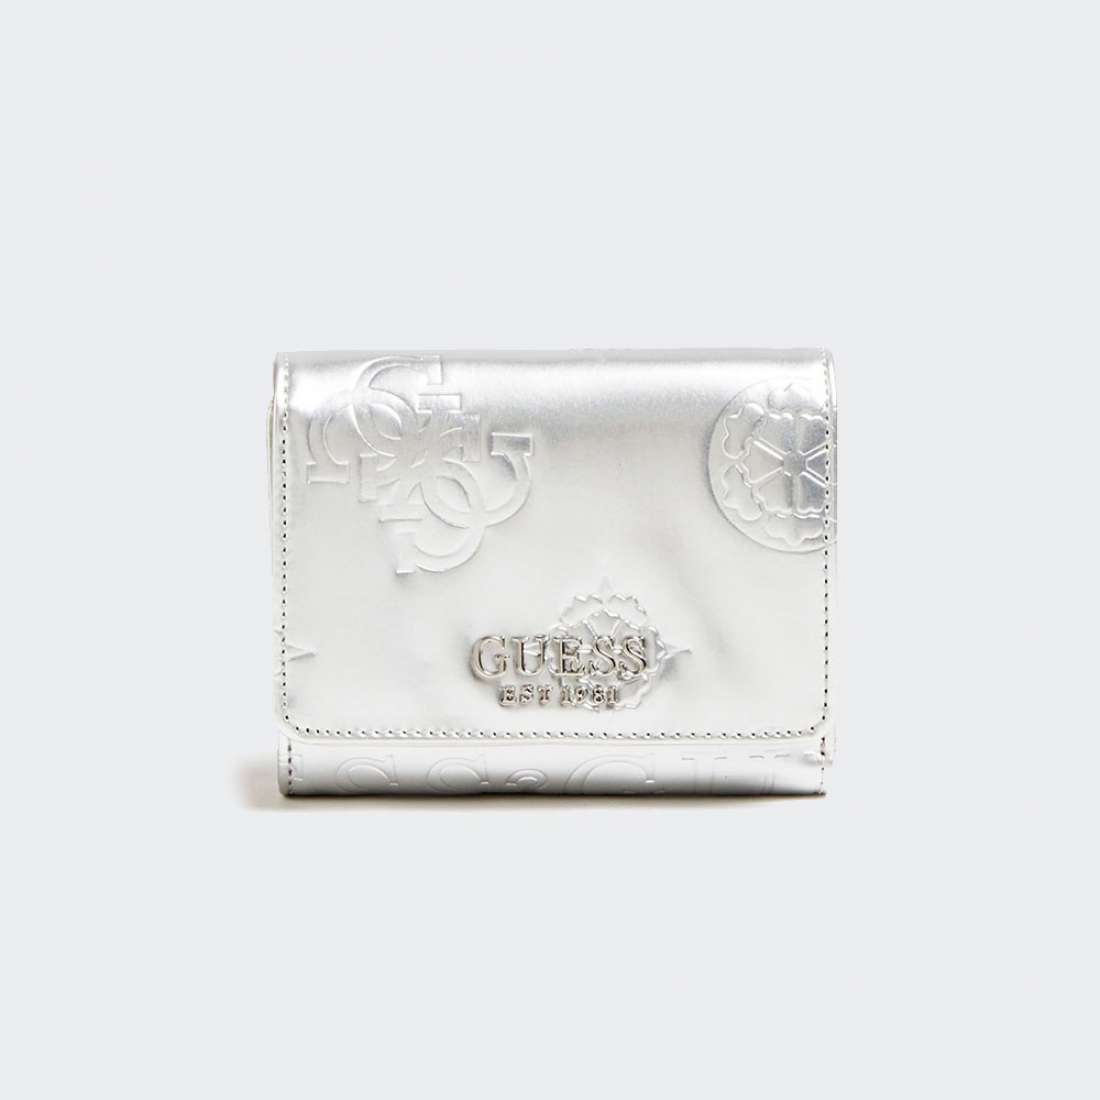 CARTEIRA GUESS KAYLYN SLG SMALL TRIFOLD SILVER